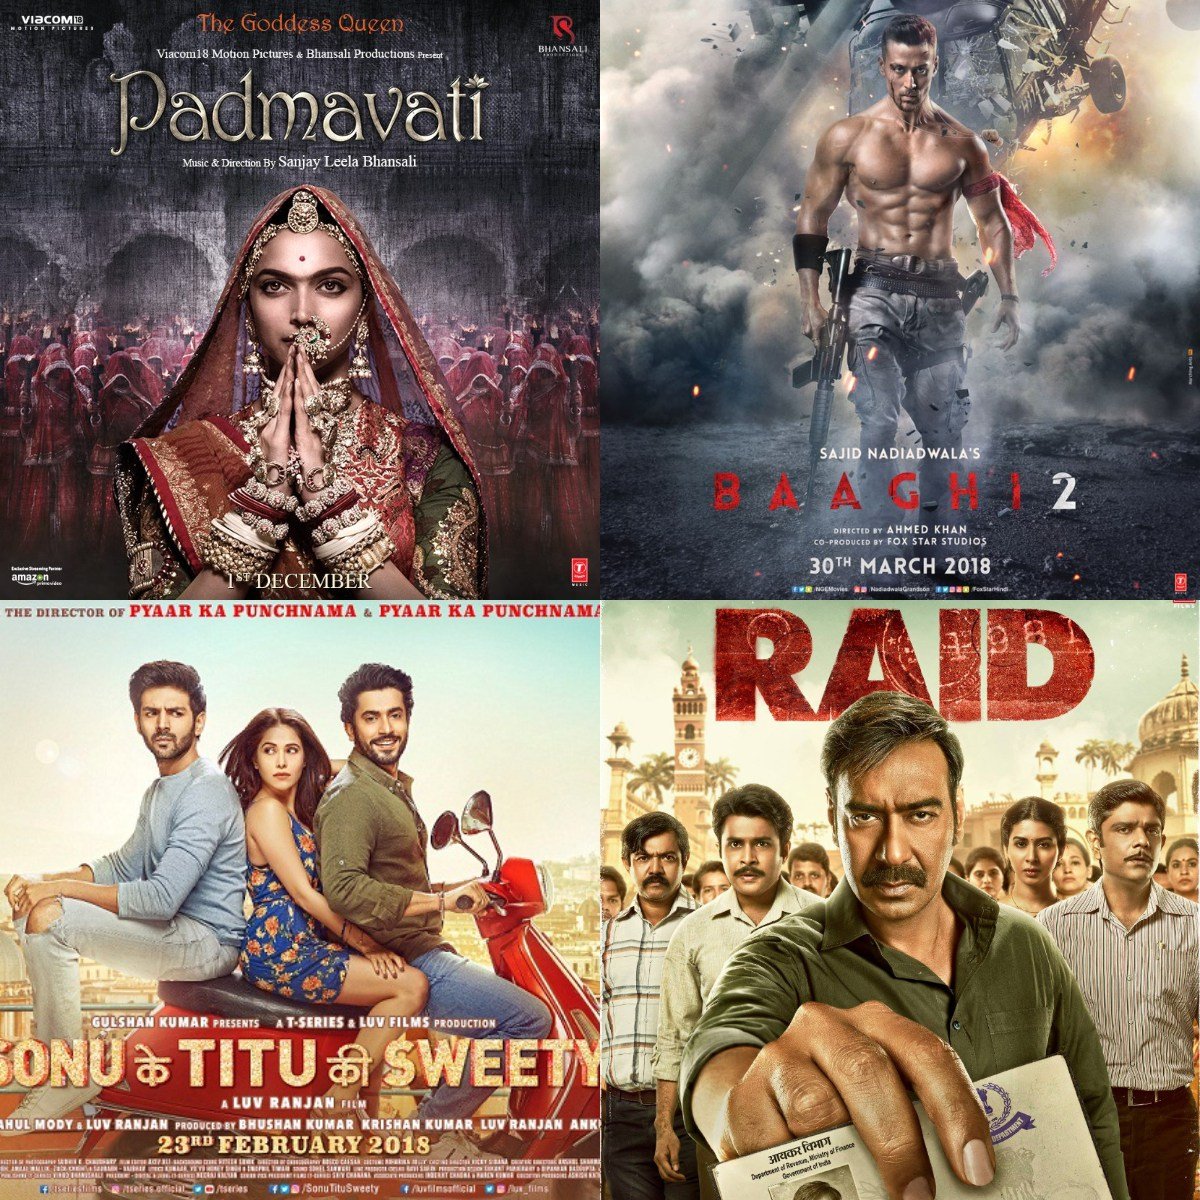 Bollywood Films that crossed 100 crores